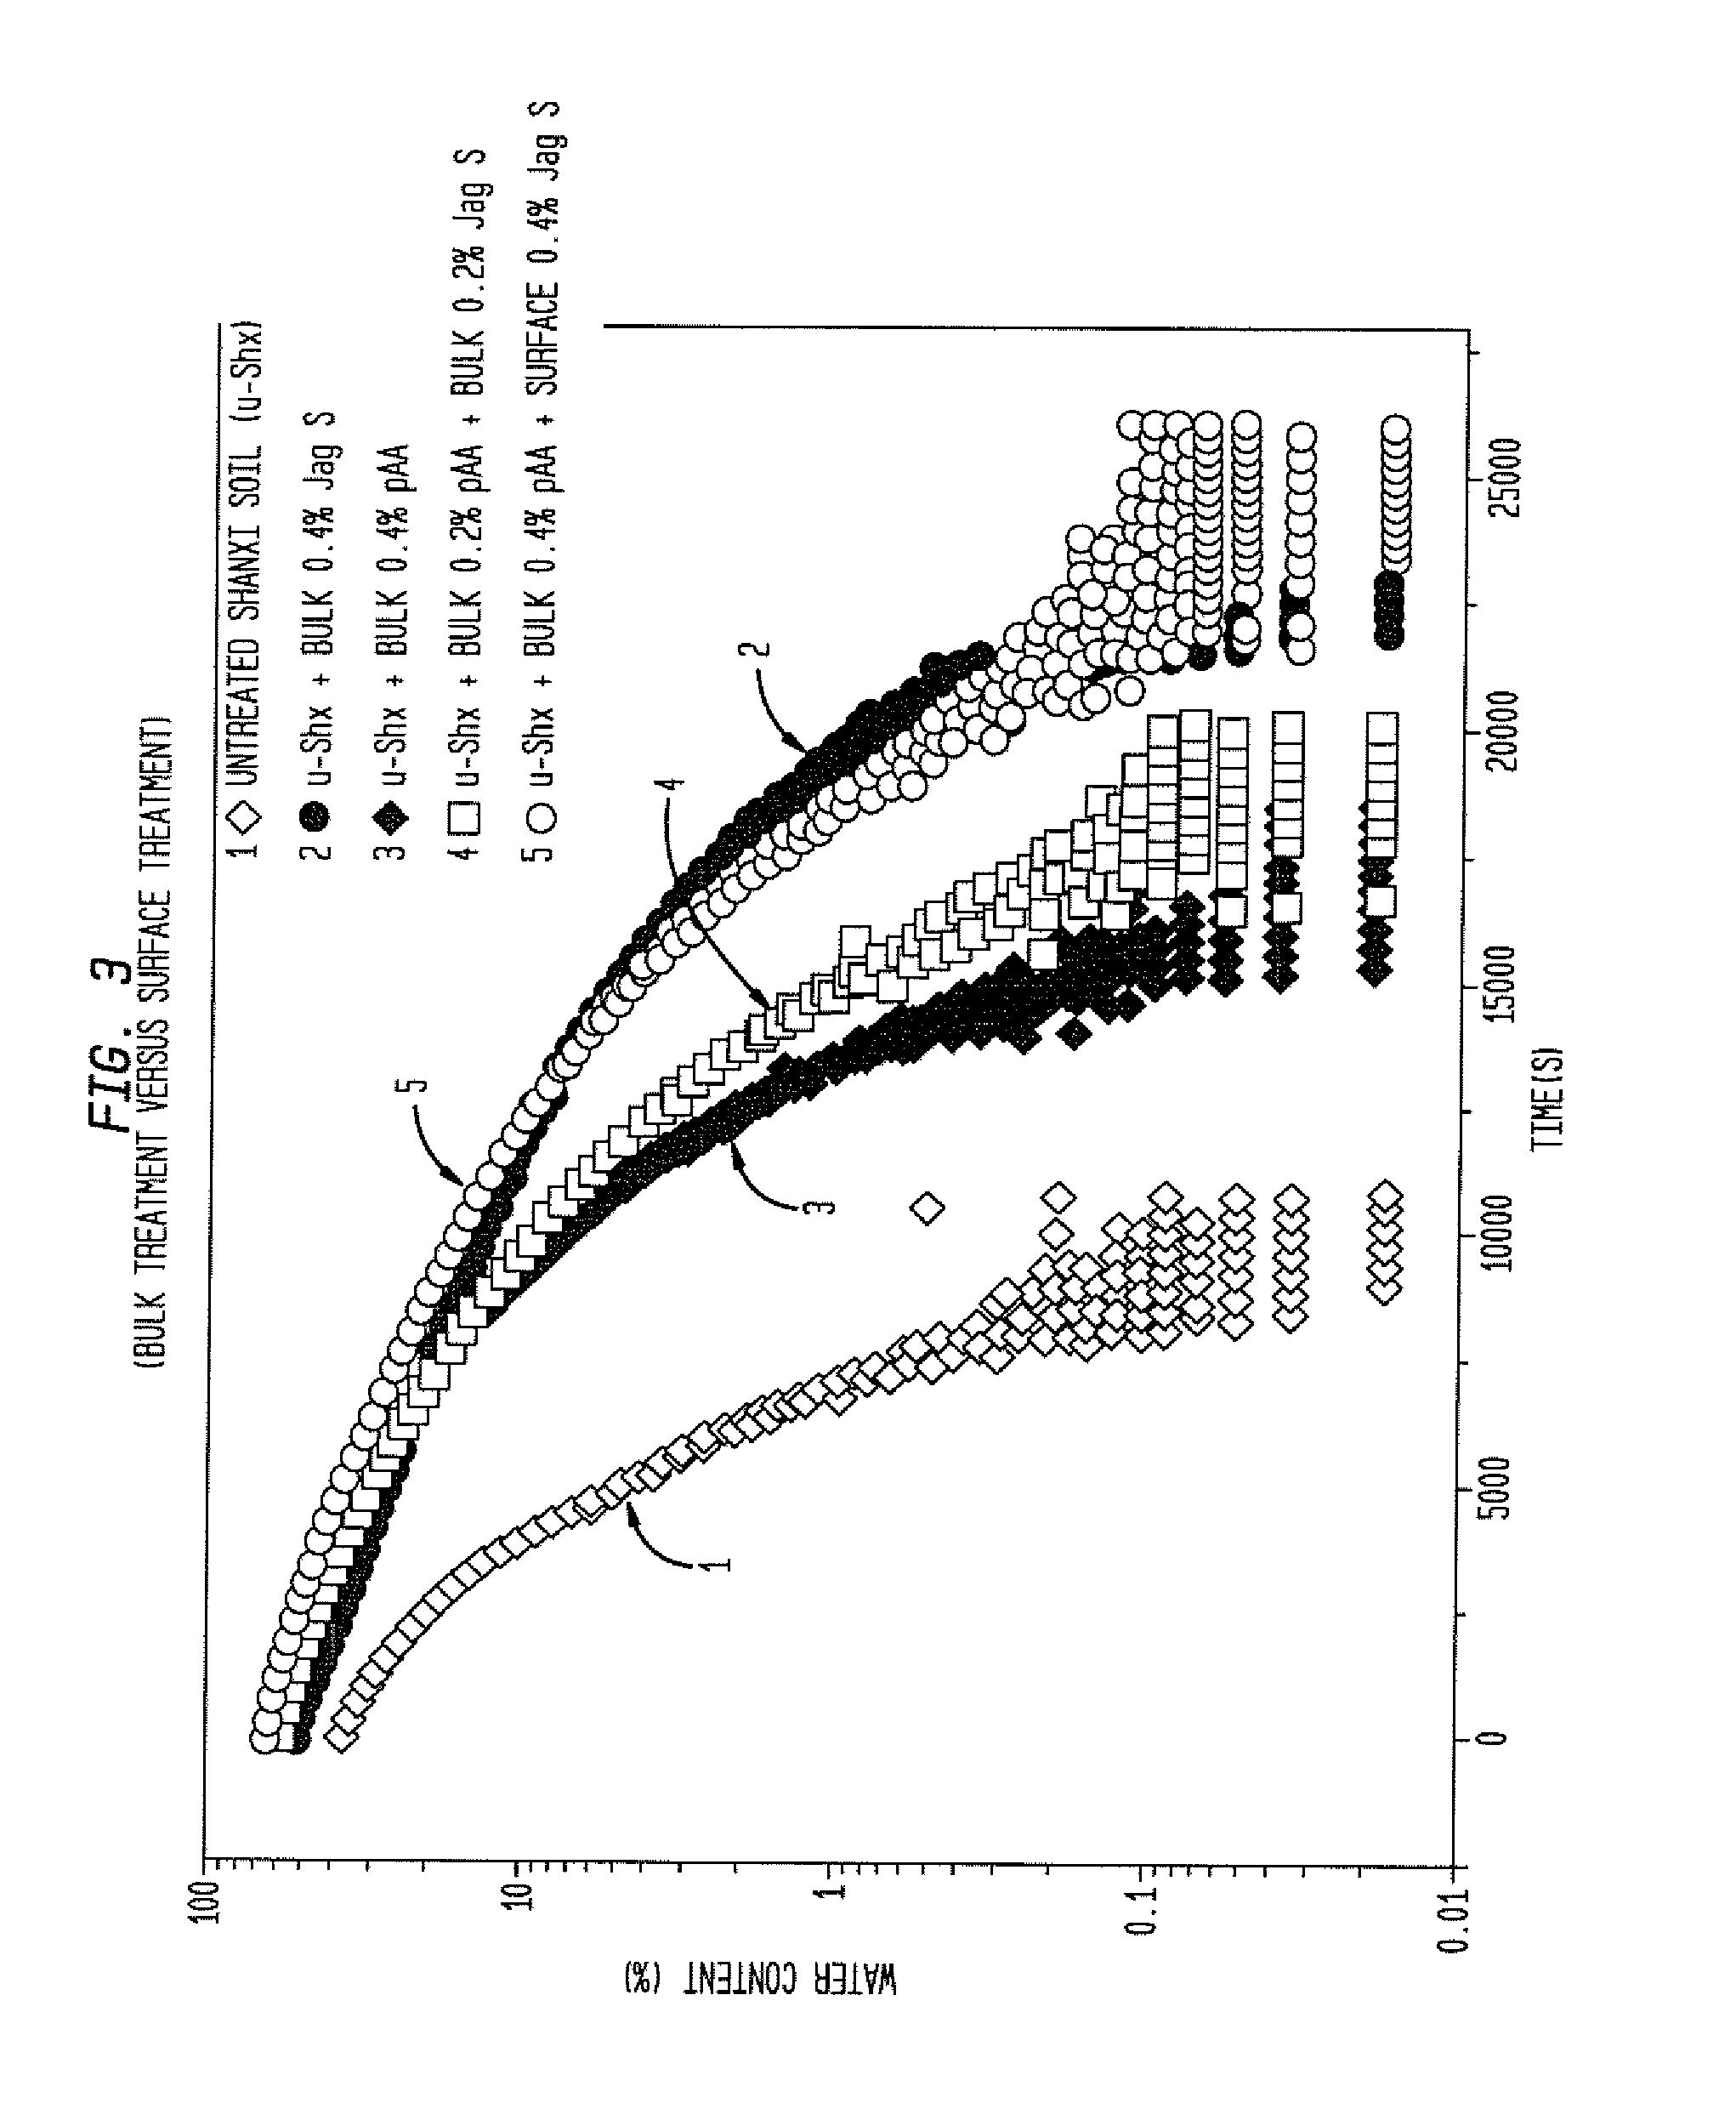 Soil Additives For Promoting Seed Germination, For Prevention of Evaporation and Methods for Use